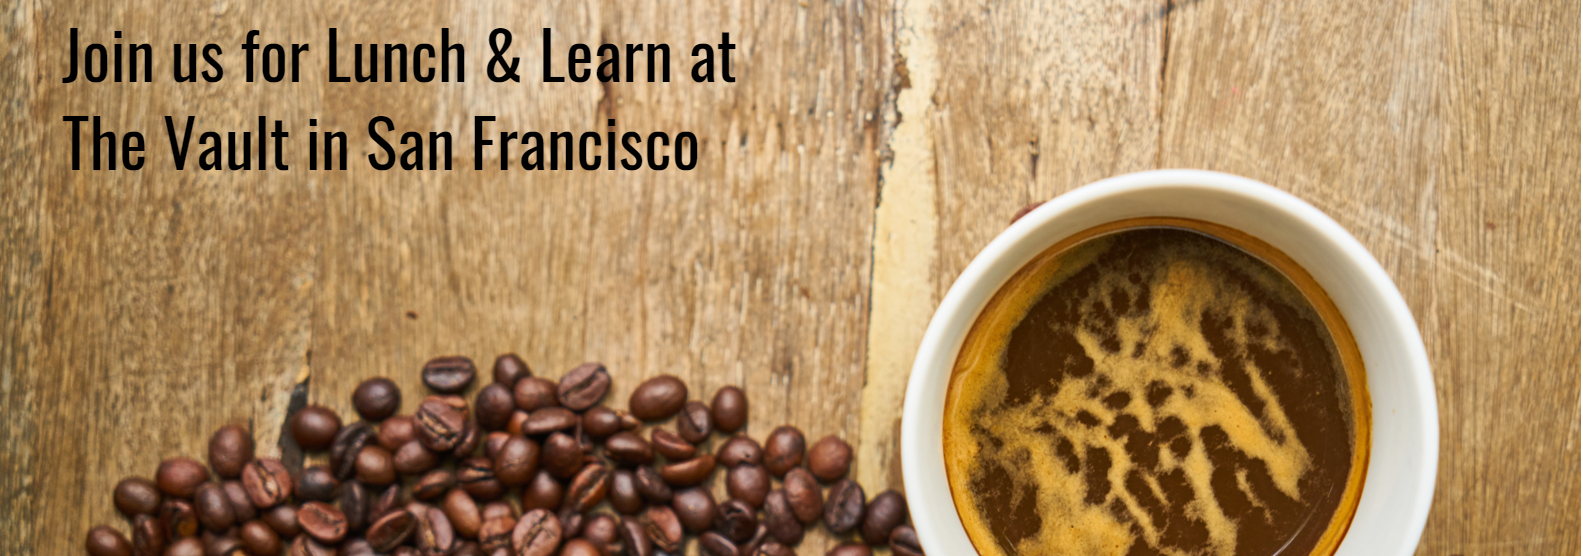 MarketJoy hosts Lunch and Learn Event in San Francisco